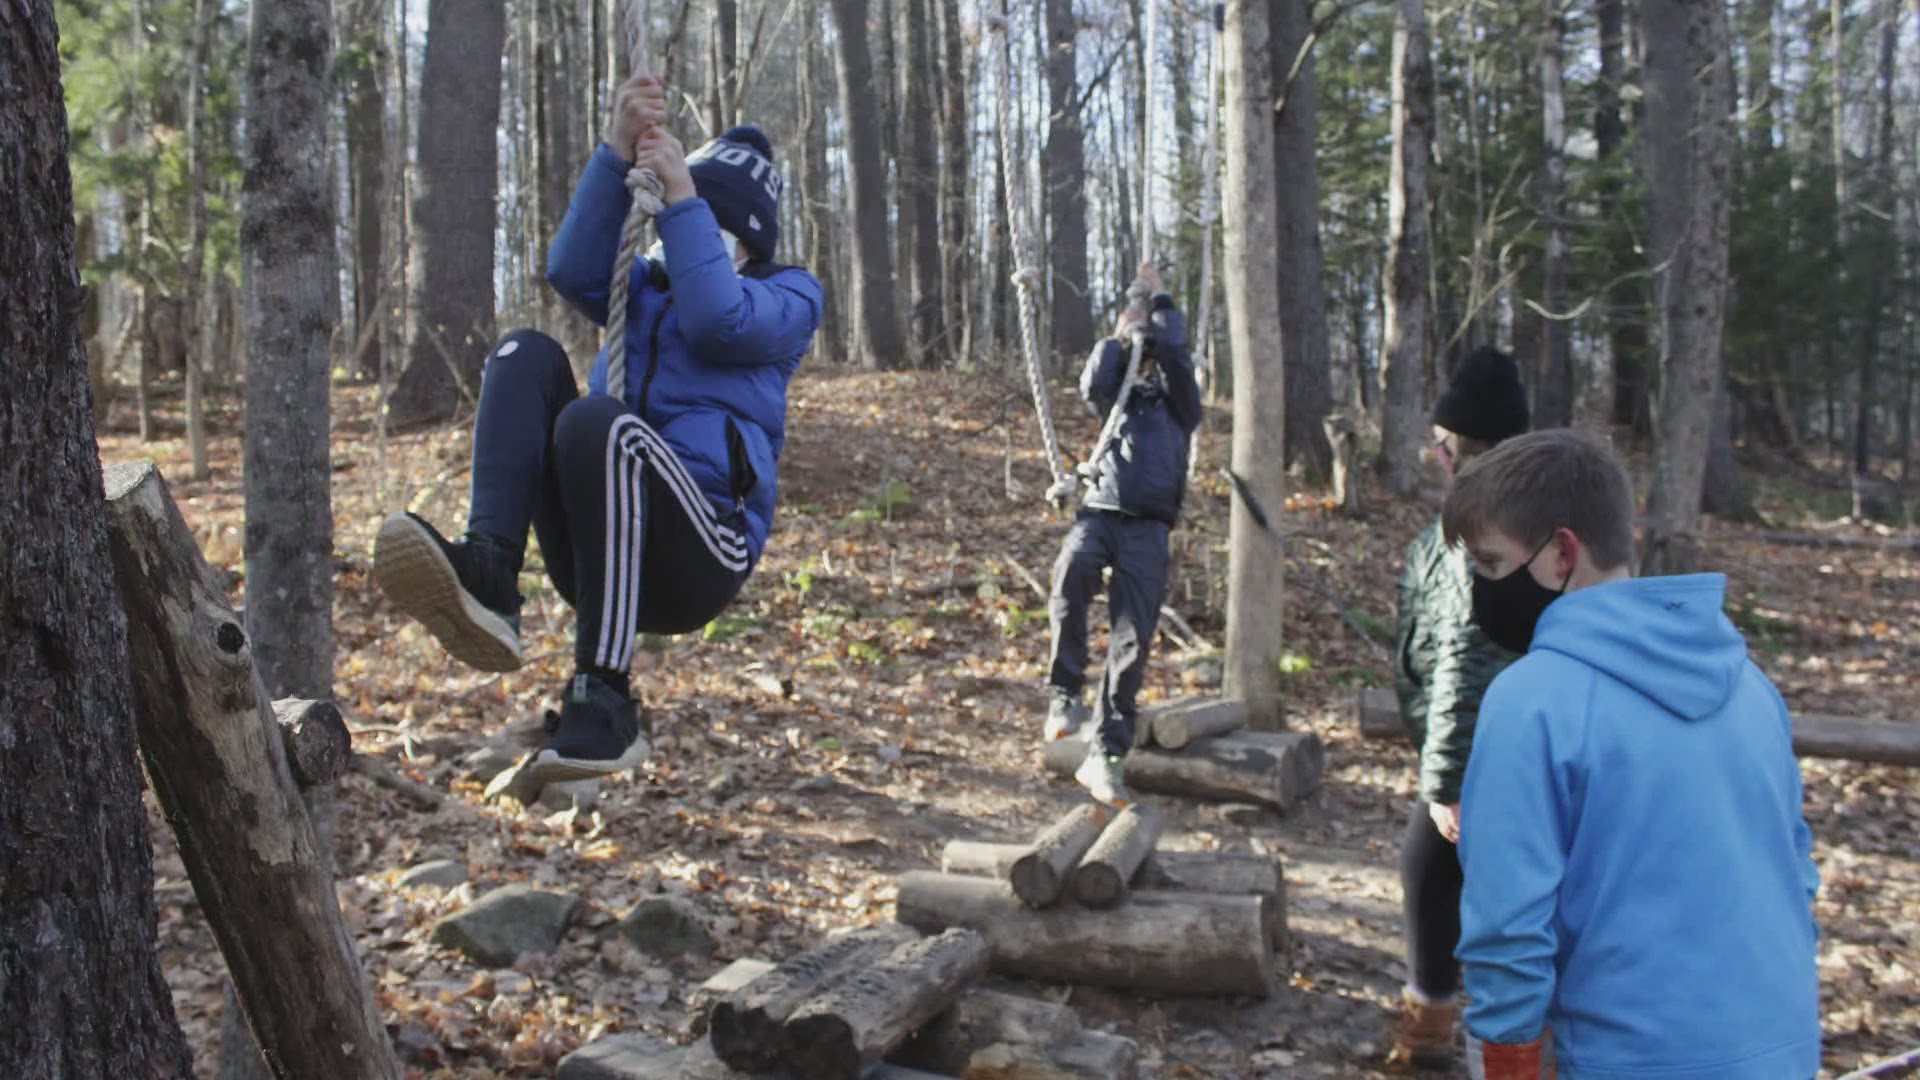 Rippleffect outdoor wilderness program incorporates adventures in students' remote learning